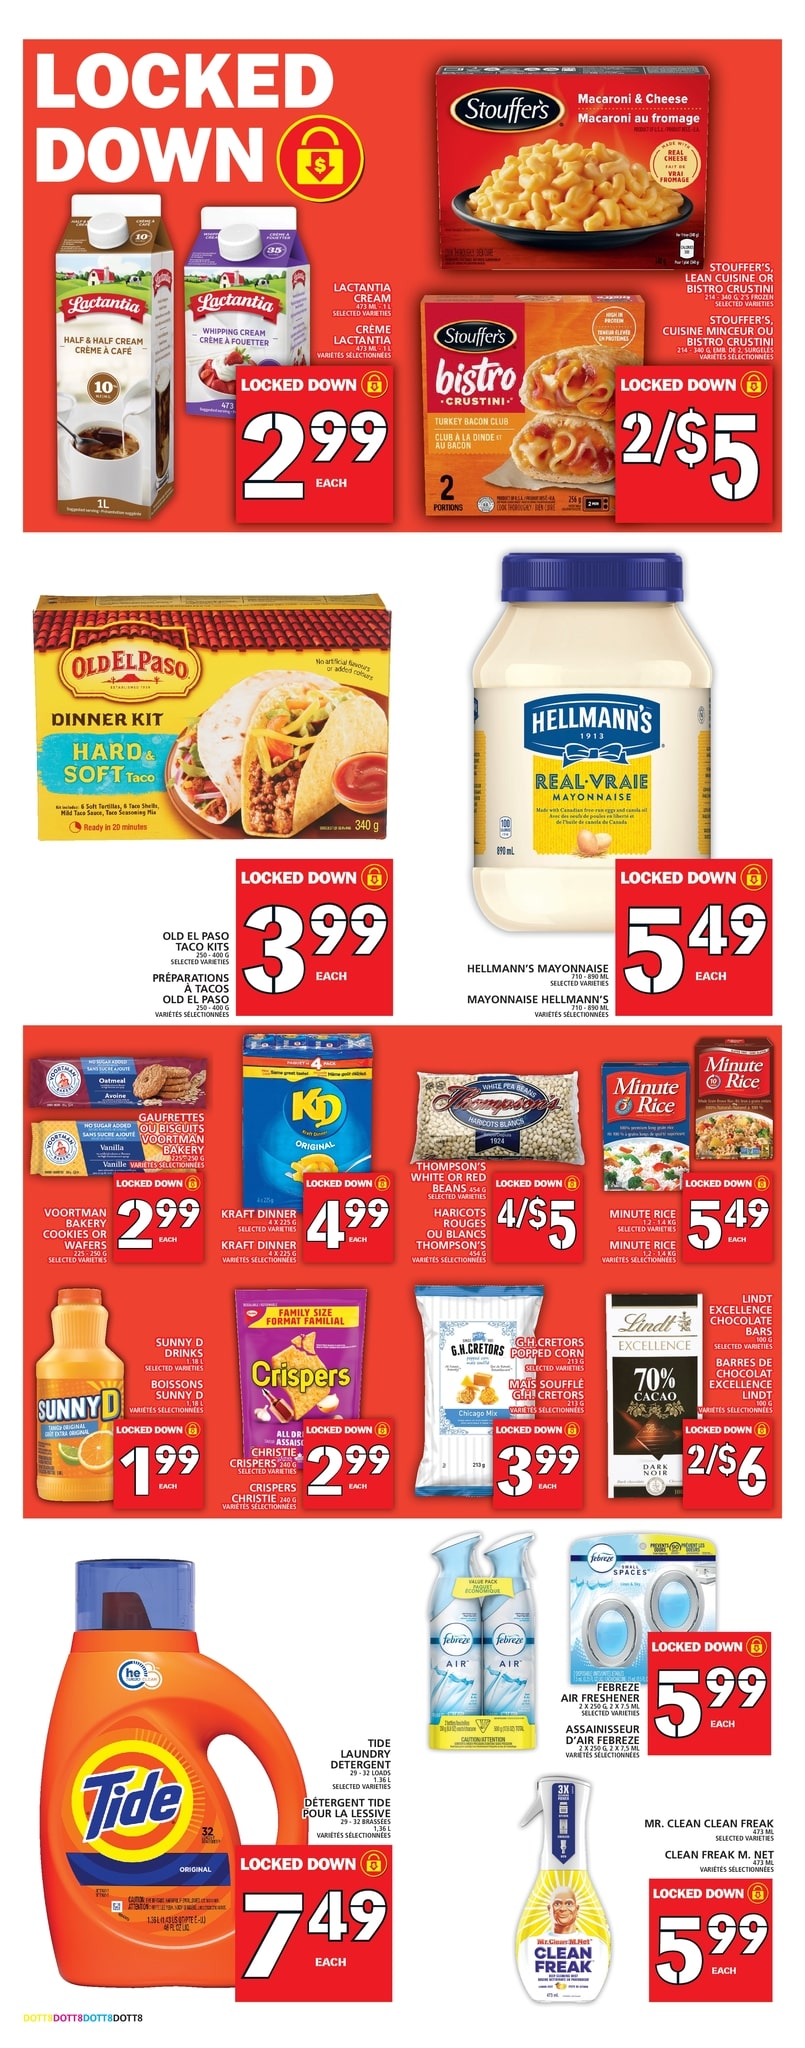 Food Basics - Weekly Flyer Specials - Page 10